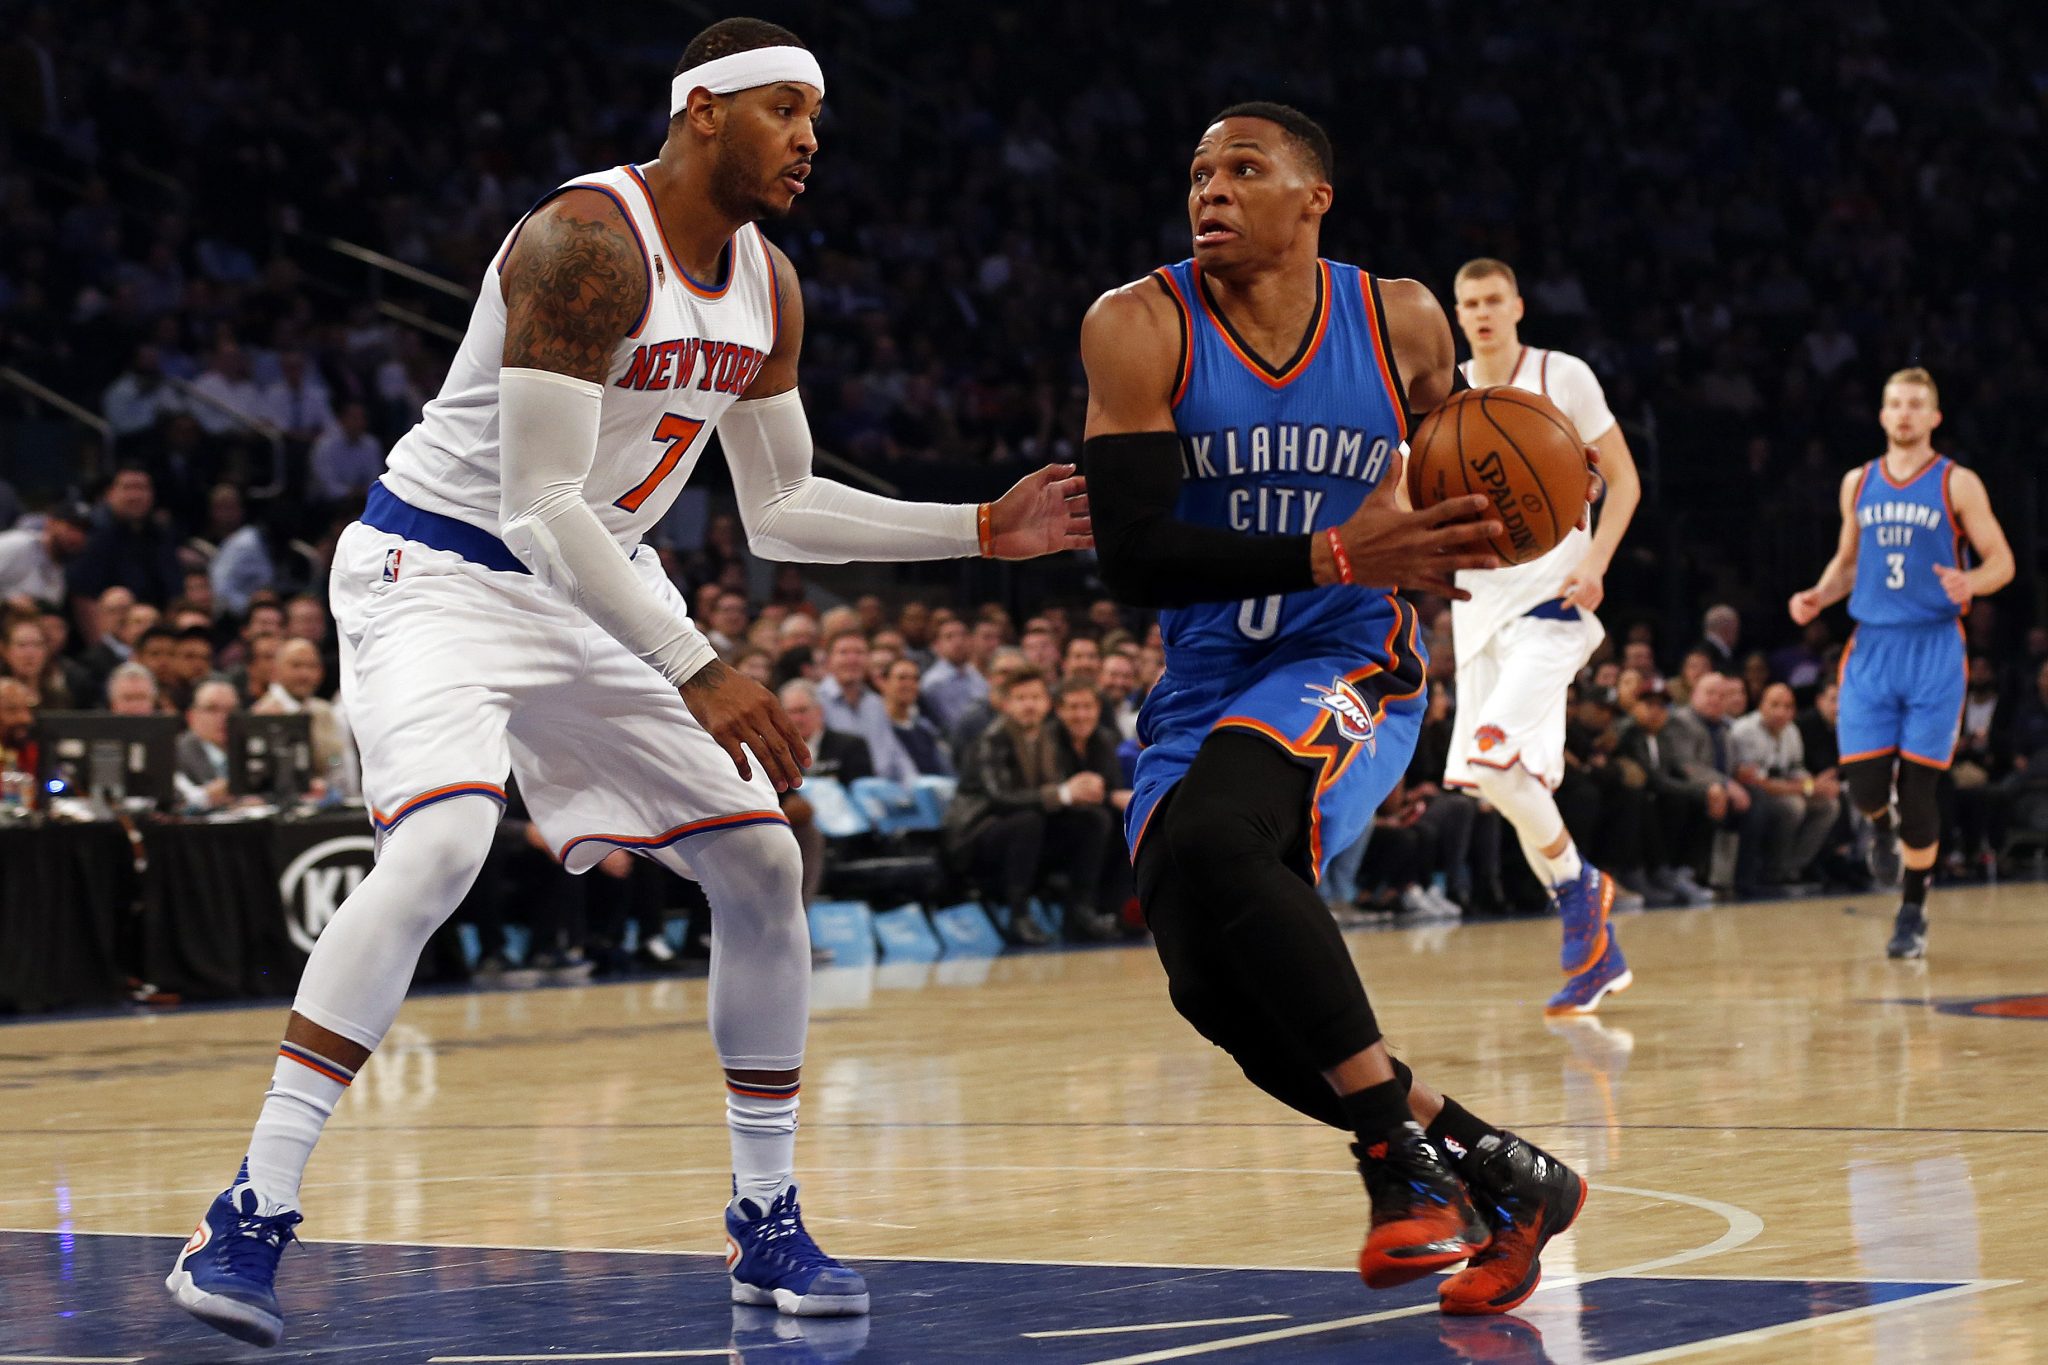 Electric Garden can't save New York Knicks against Russell Westbrook, Thunder (Highlights) 